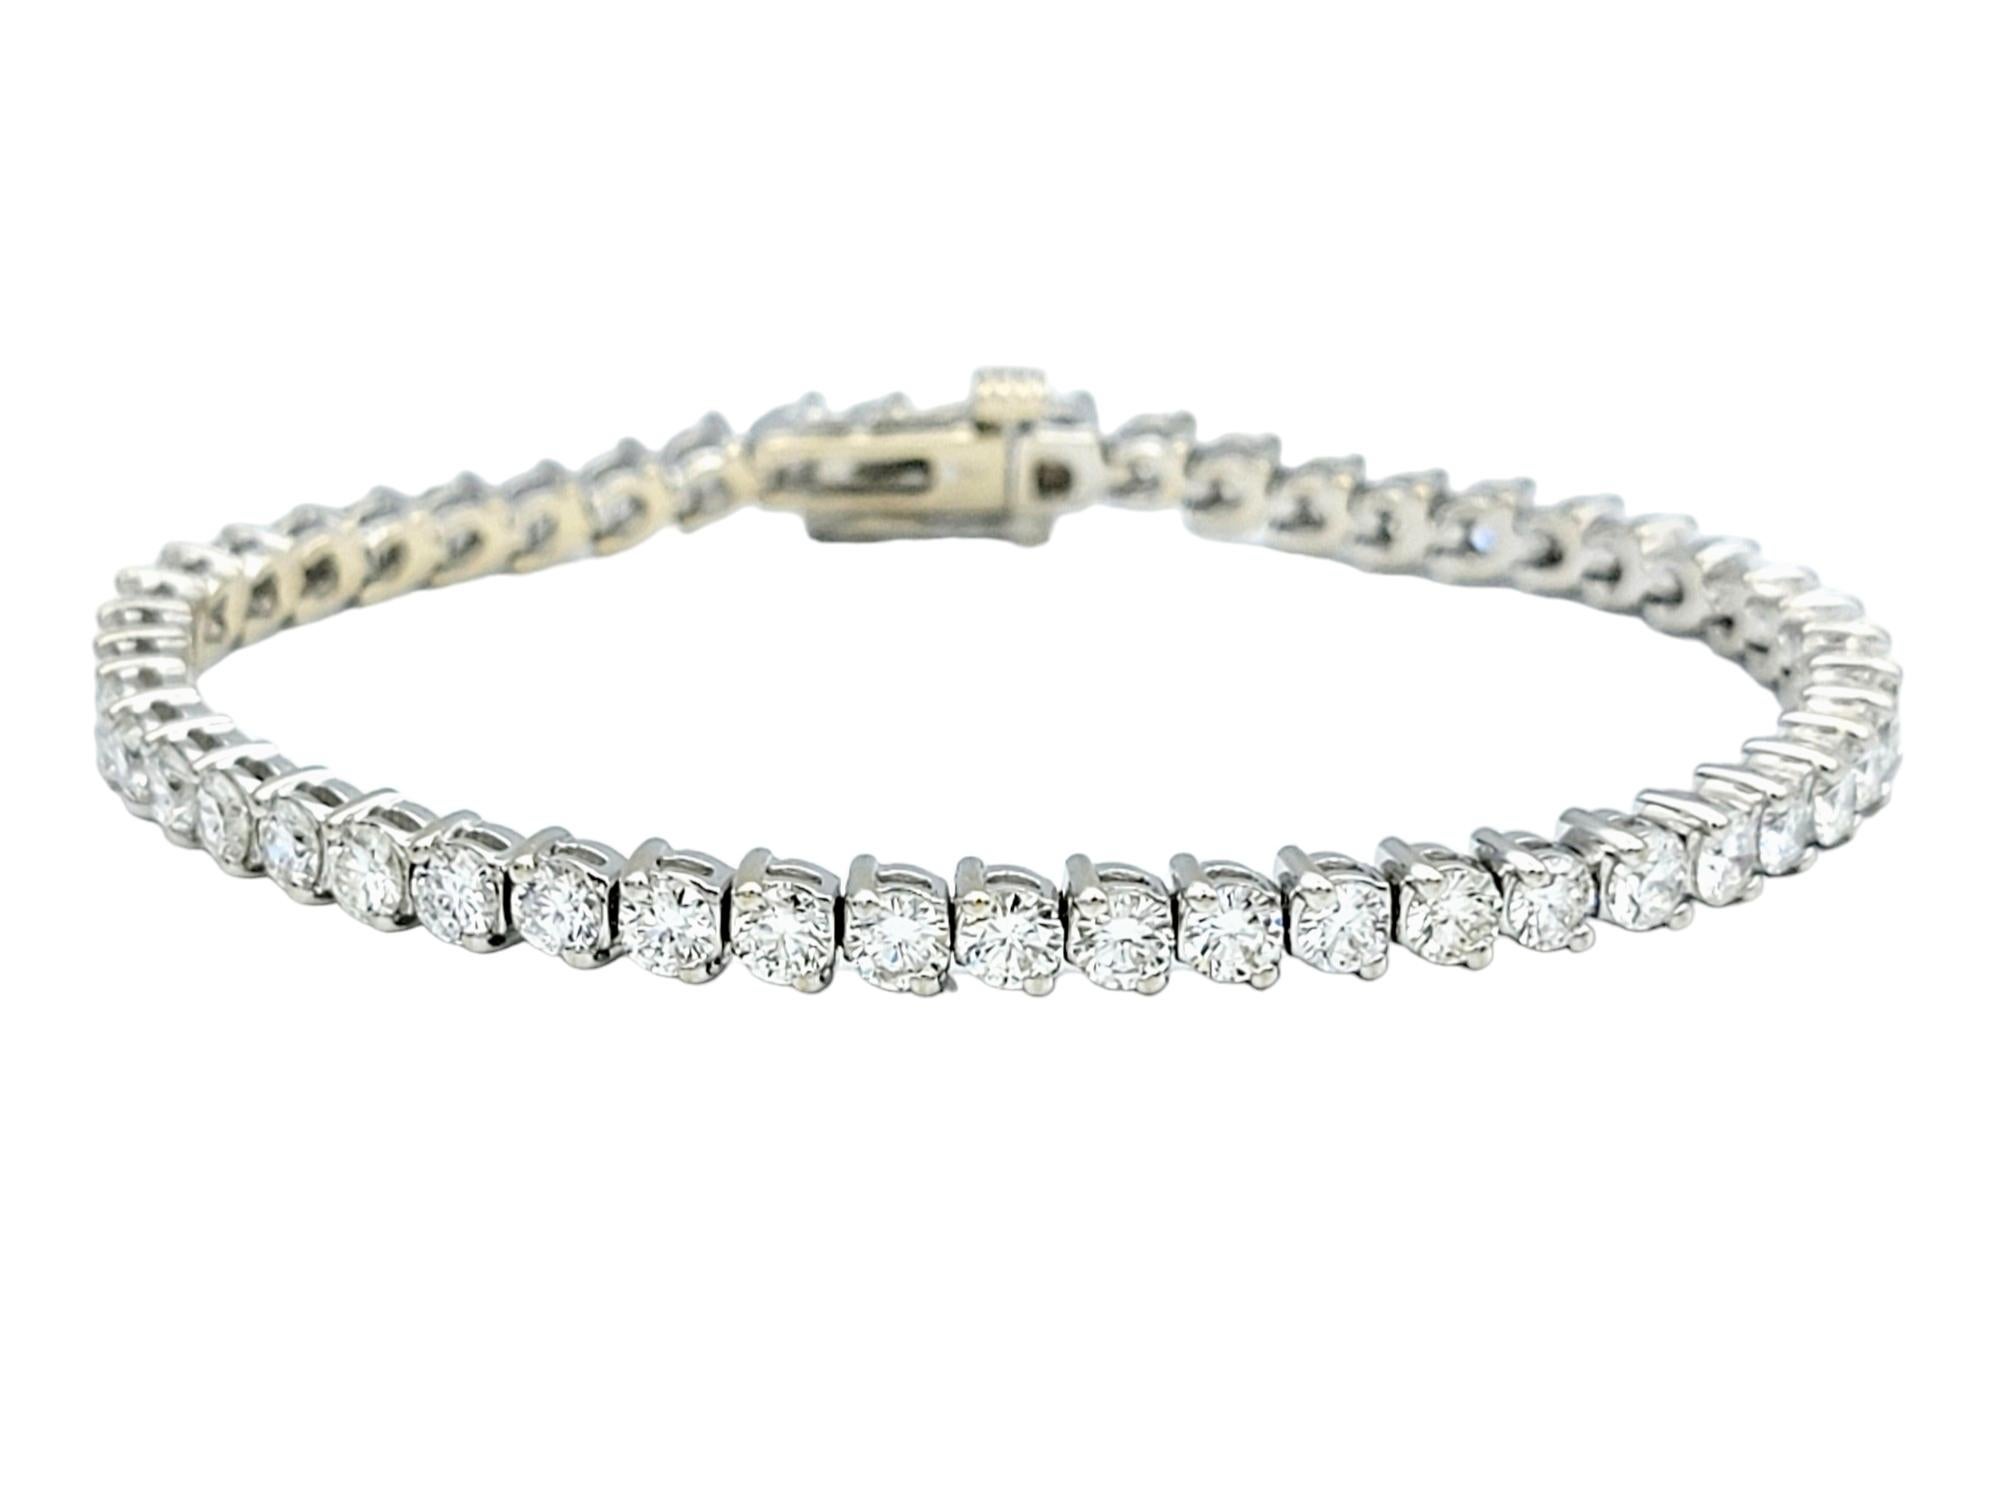 The inner circumference of this bracelet measures 6.5 inches and will comfortably fit up to a 6.25 inch wrist. 

This timeless diamond tennis bracelet is a radiant display of elegance and refinement. Set in lustrous 18 karat white gold, the bracelet